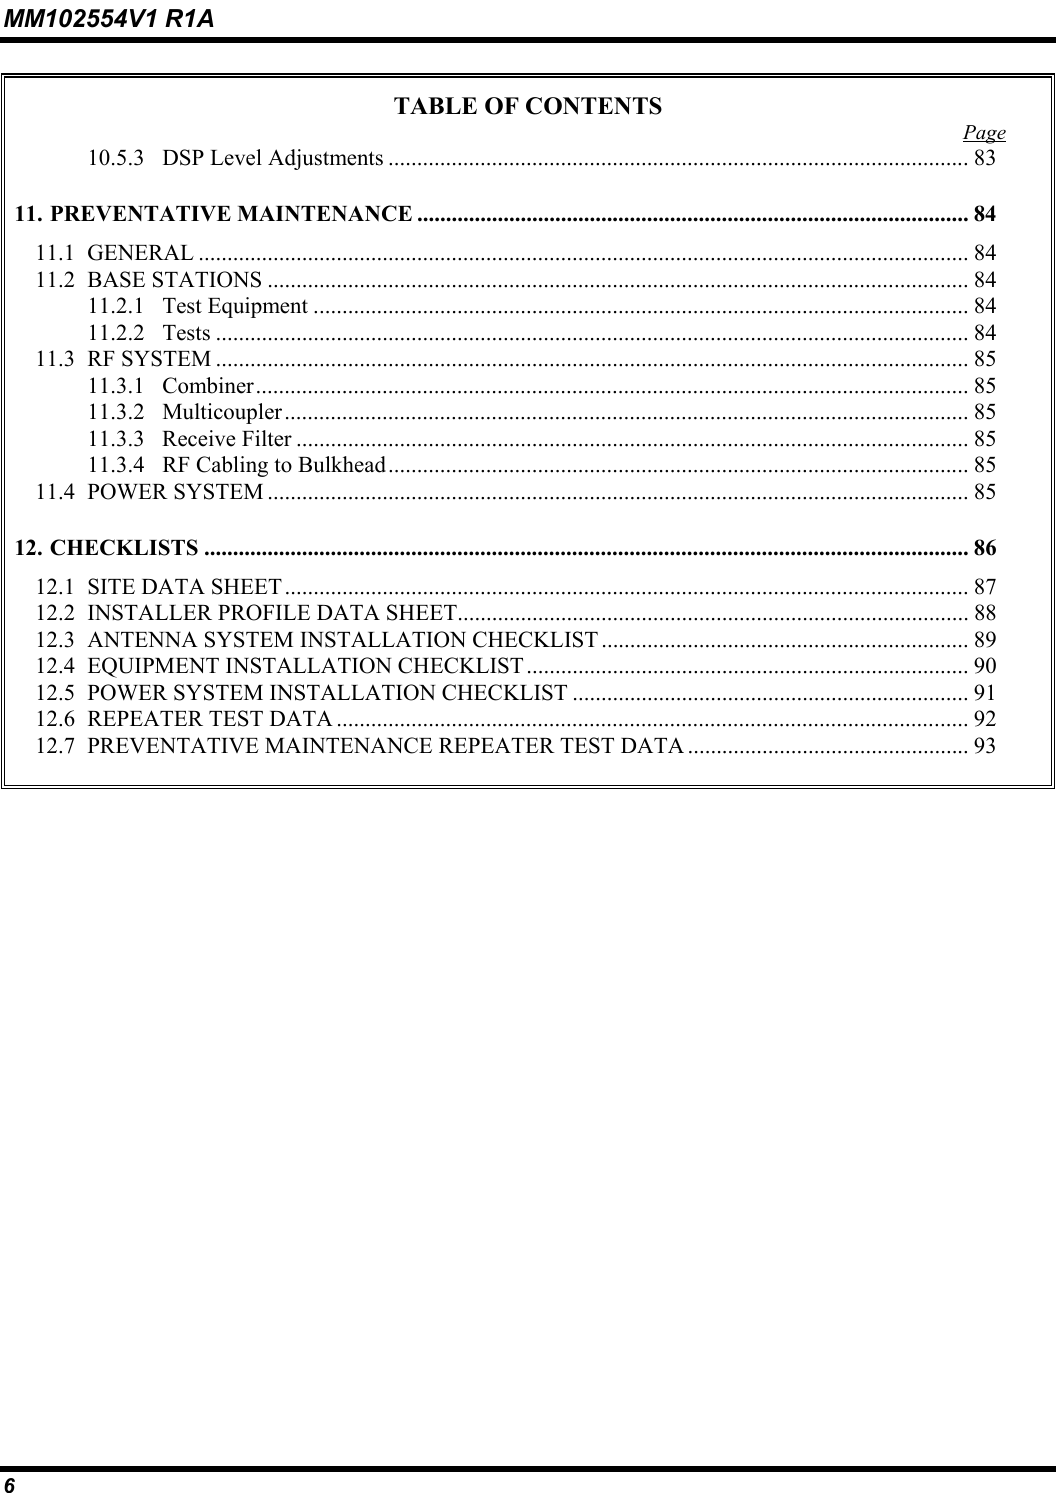 MM102554V1 R1A 6   TABLE OF CONTENTS  Page 10.5.3  DSP Level Adjustments ..................................................................................................... 83 11. PREVENTATIVE MAINTENANCE ................................................................................................ 84 11.1 GENERAL ...................................................................................................................................... 84 11.2 BASE STATIONS .......................................................................................................................... 84 11.2.1 Test Equipment .................................................................................................................. 84 11.2.2 Tests ................................................................................................................................... 84 11.3 RF SYSTEM ................................................................................................................................... 85 11.3.1 Combiner............................................................................................................................ 85 11.3.2 Multicoupler....................................................................................................................... 85 11.3.3 Receive Filter ..................................................................................................................... 85 11.3.4  RF Cabling to Bulkhead..................................................................................................... 85 11.4 POWER SYSTEM .......................................................................................................................... 85 12. CHECKLISTS ..................................................................................................................................... 86 12.1  SITE DATA SHEET ....................................................................................................................... 87 12.2  INSTALLER PROFILE DATA SHEET......................................................................................... 88 12.3  ANTENNA SYSTEM INSTALLATION CHECKLIST ................................................................ 89 12.4  EQUIPMENT INSTALLATION CHECKLIST ............................................................................. 90 12.5  POWER SYSTEM INSTALLATION CHECKLIST ..................................................................... 91 12.6  REPEATER TEST DATA .............................................................................................................. 92 12.7  PREVENTATIVE MAINTENANCE REPEATER TEST DATA ................................................. 93     